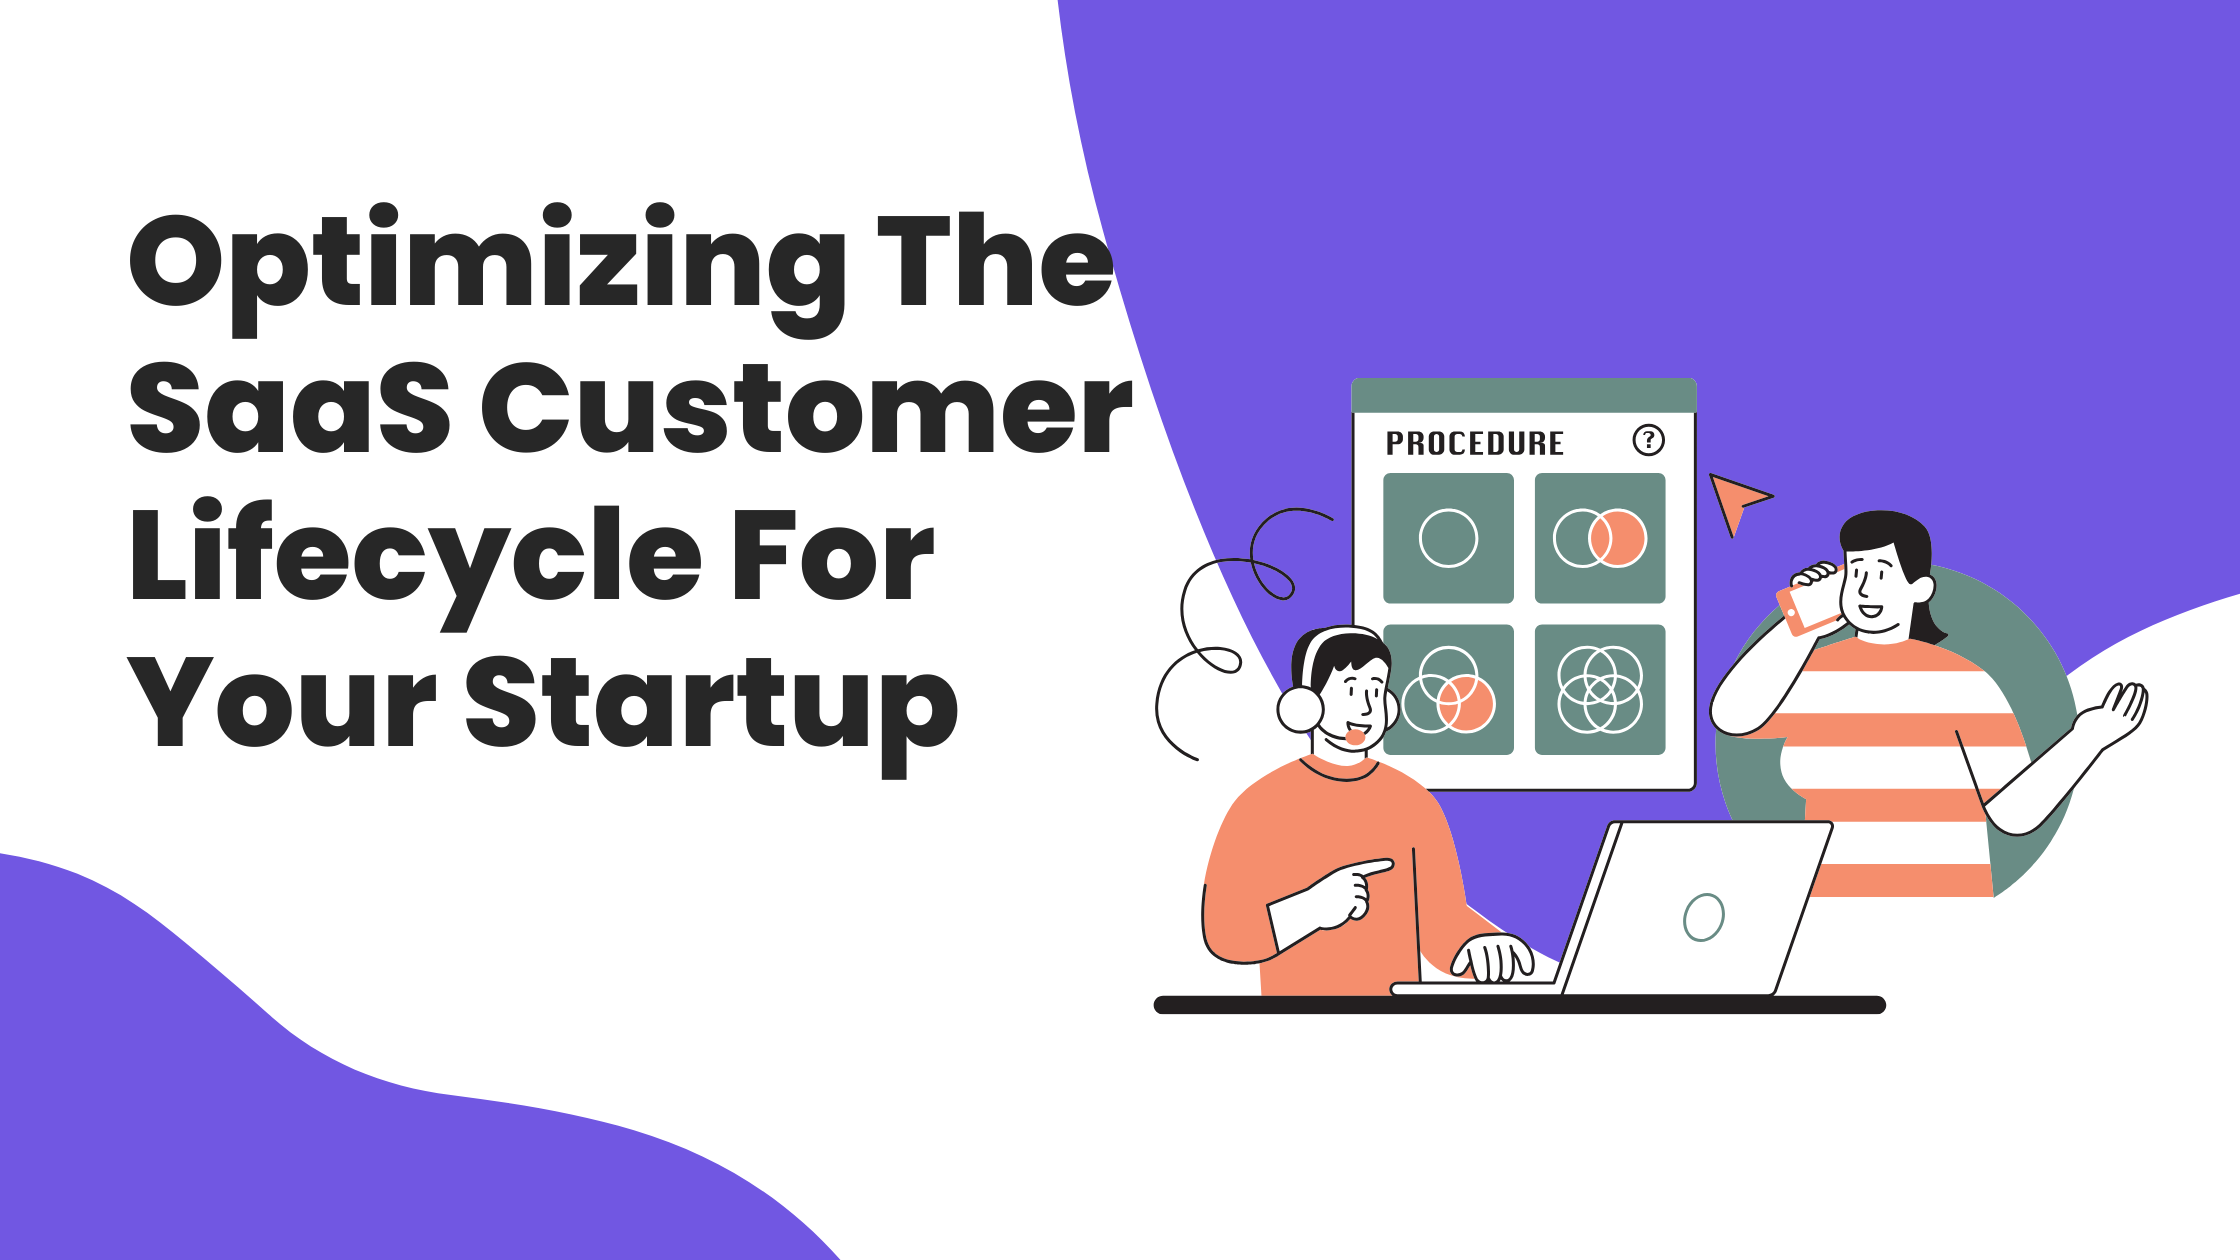 Optimizing The SaaS Customer Lifecycle For Your Startup